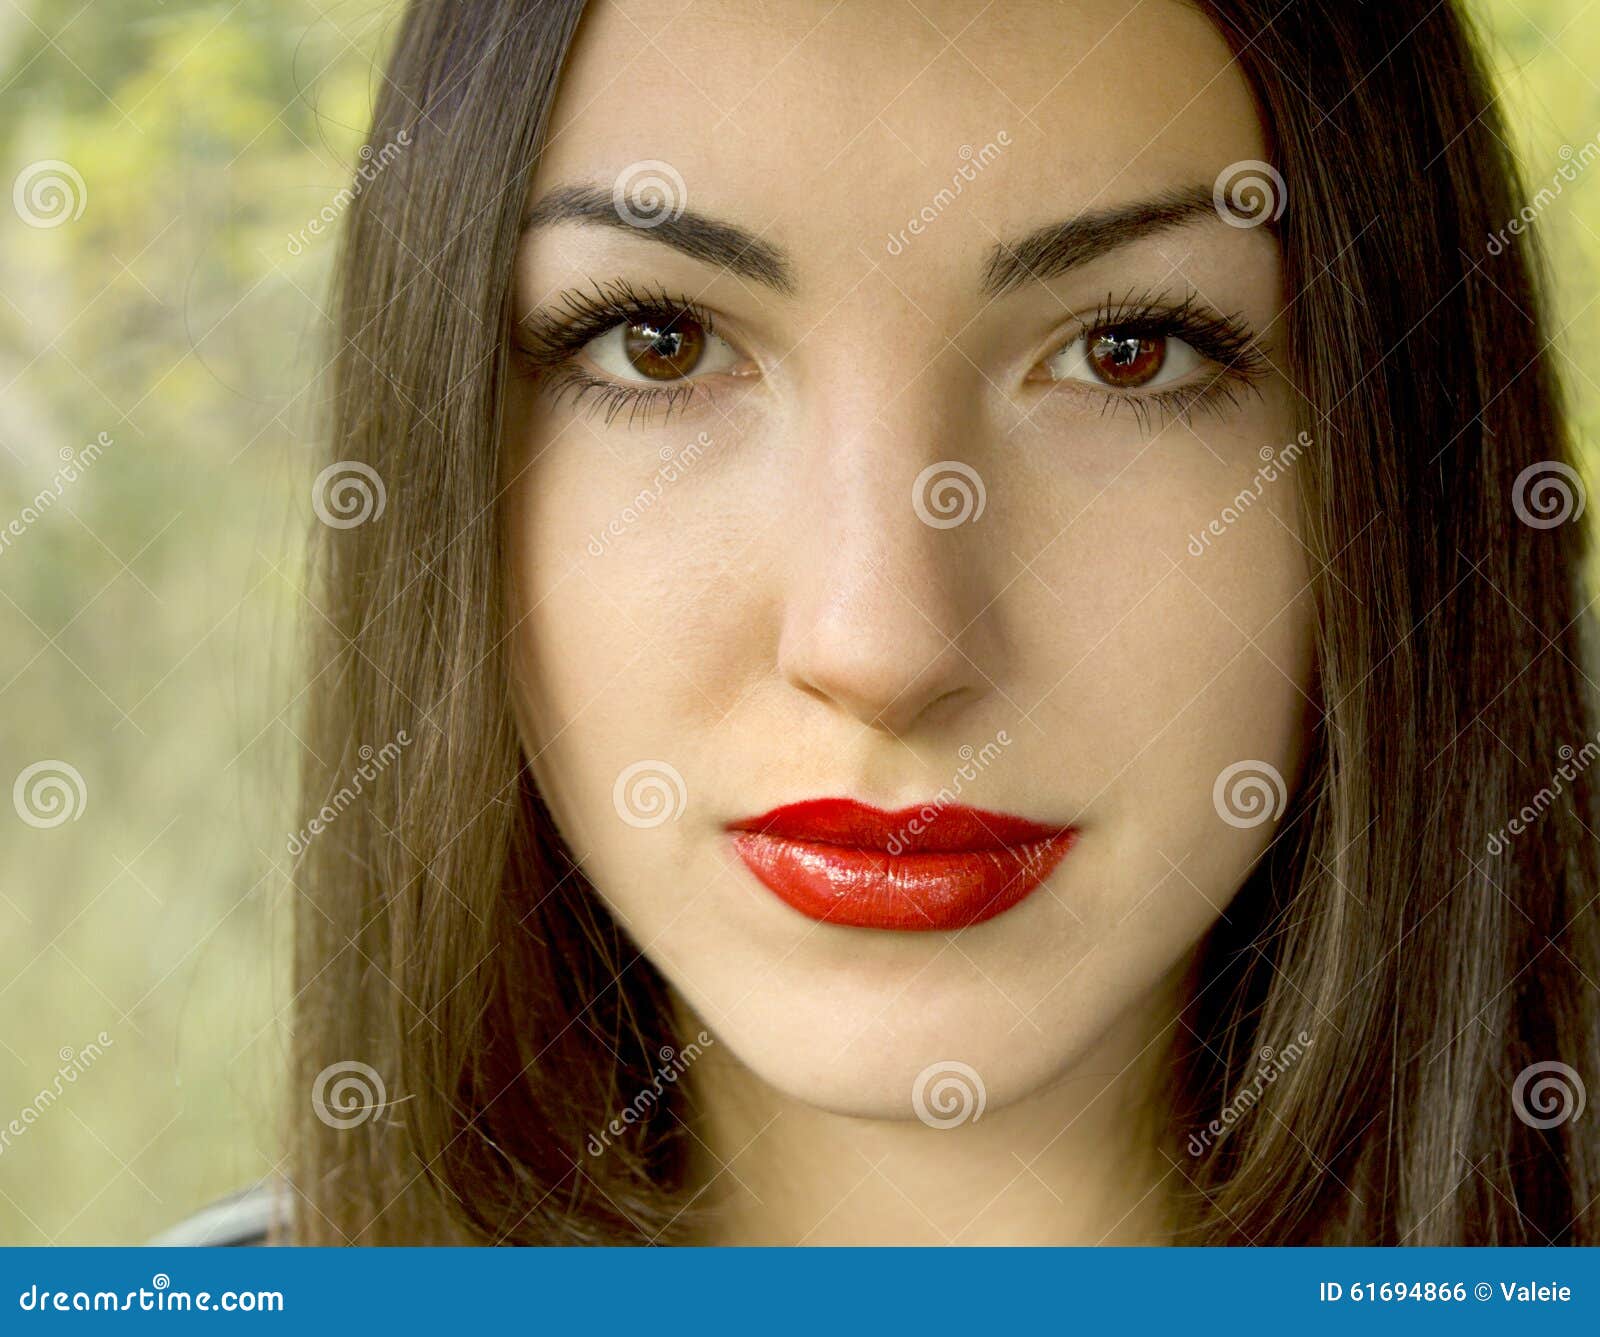 Portrait Of A Girl With Dark Hair With The Brown Eyed And